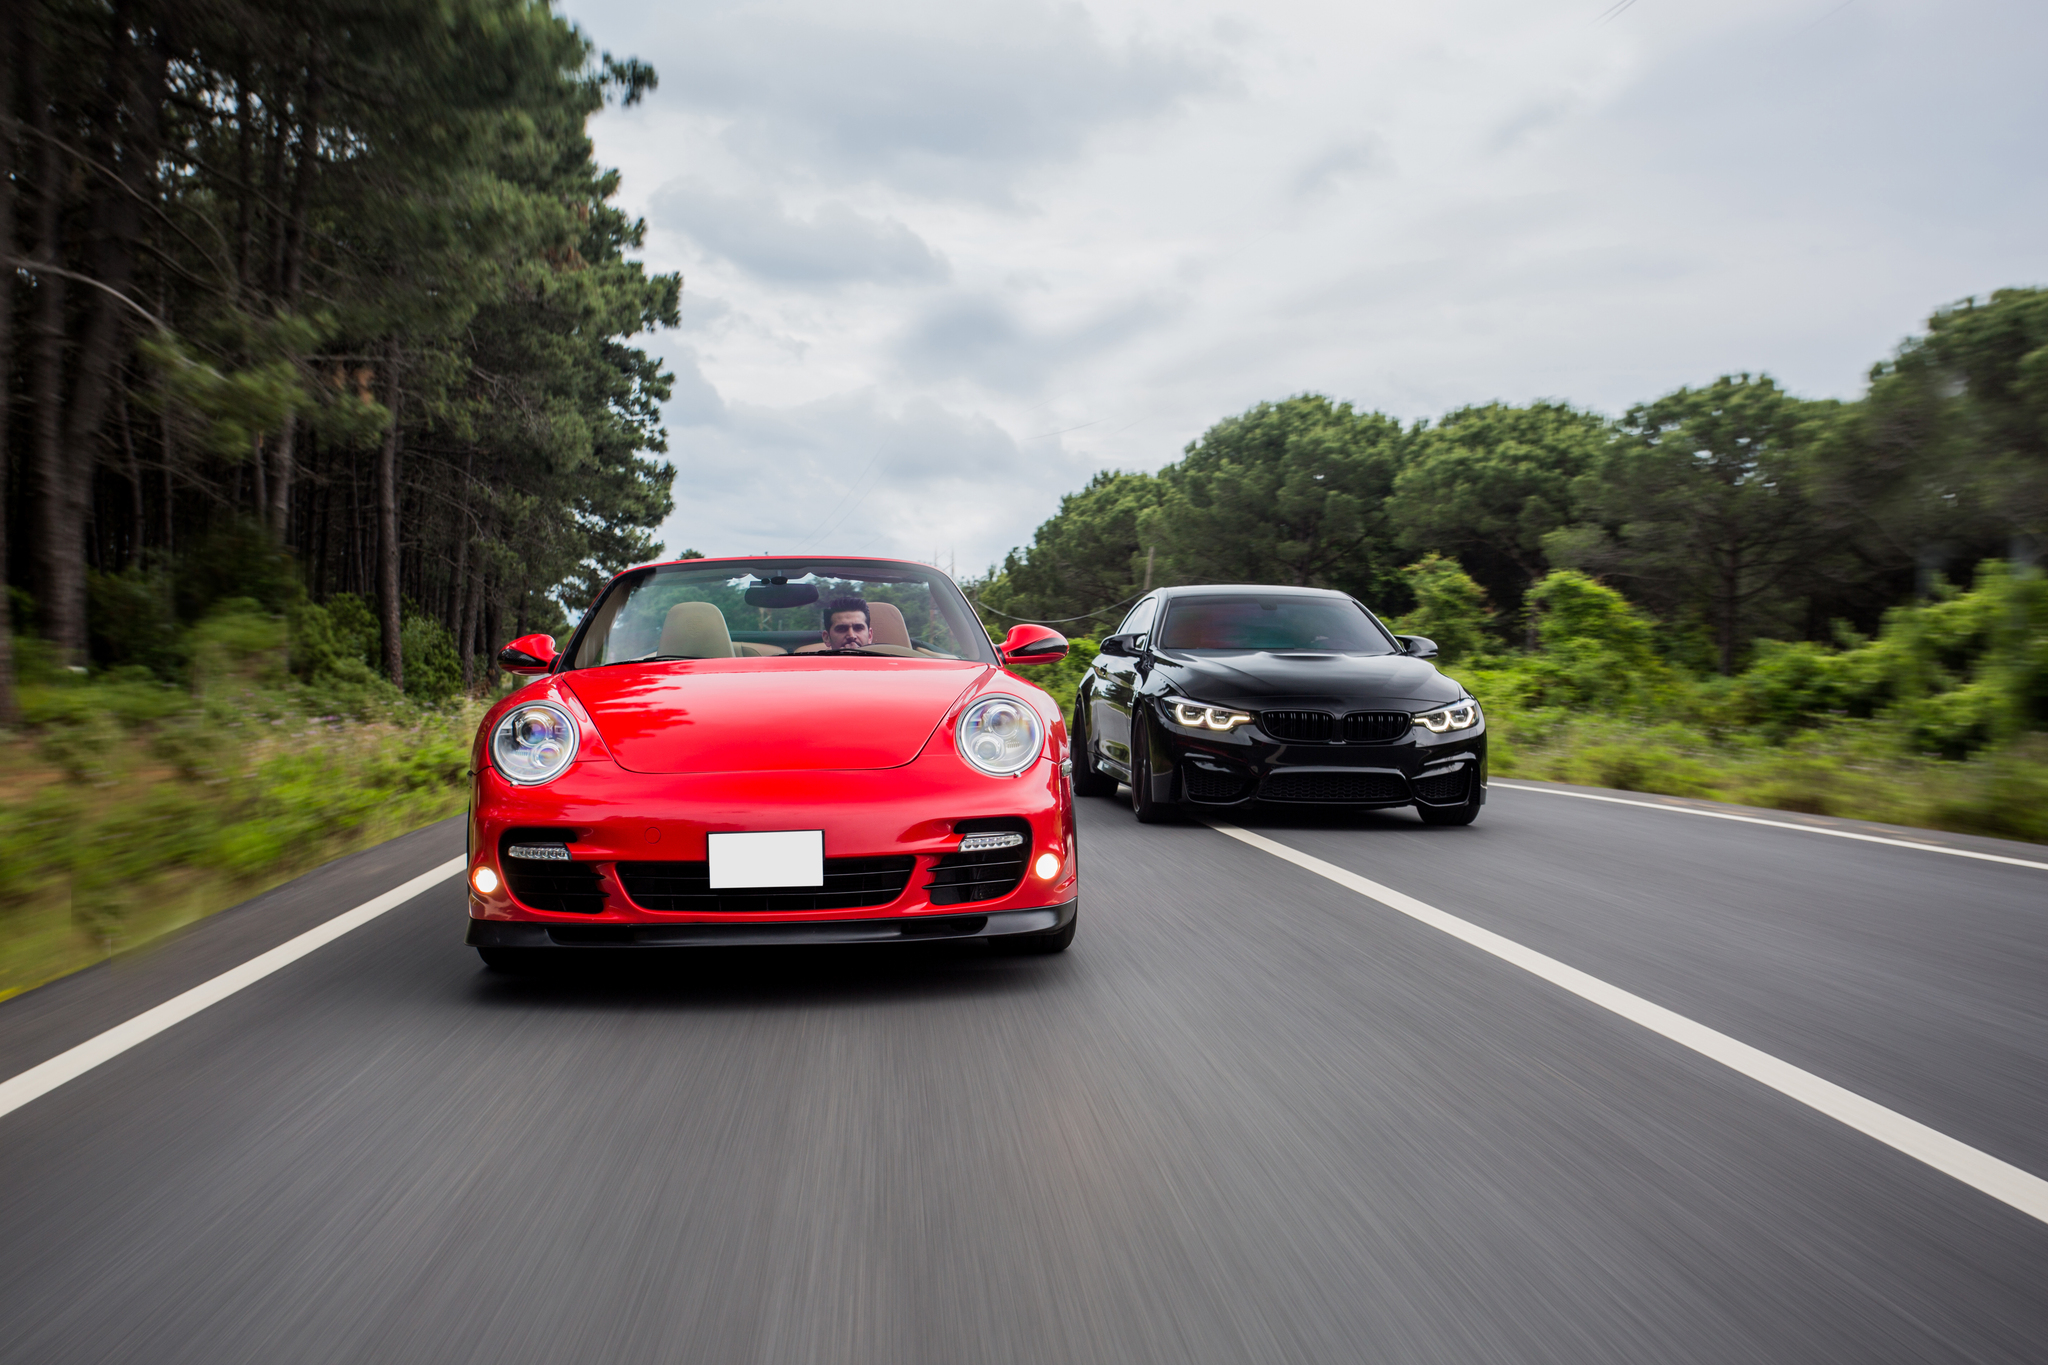 Sports Car Insurance: Key Considerations to Keep in Mind